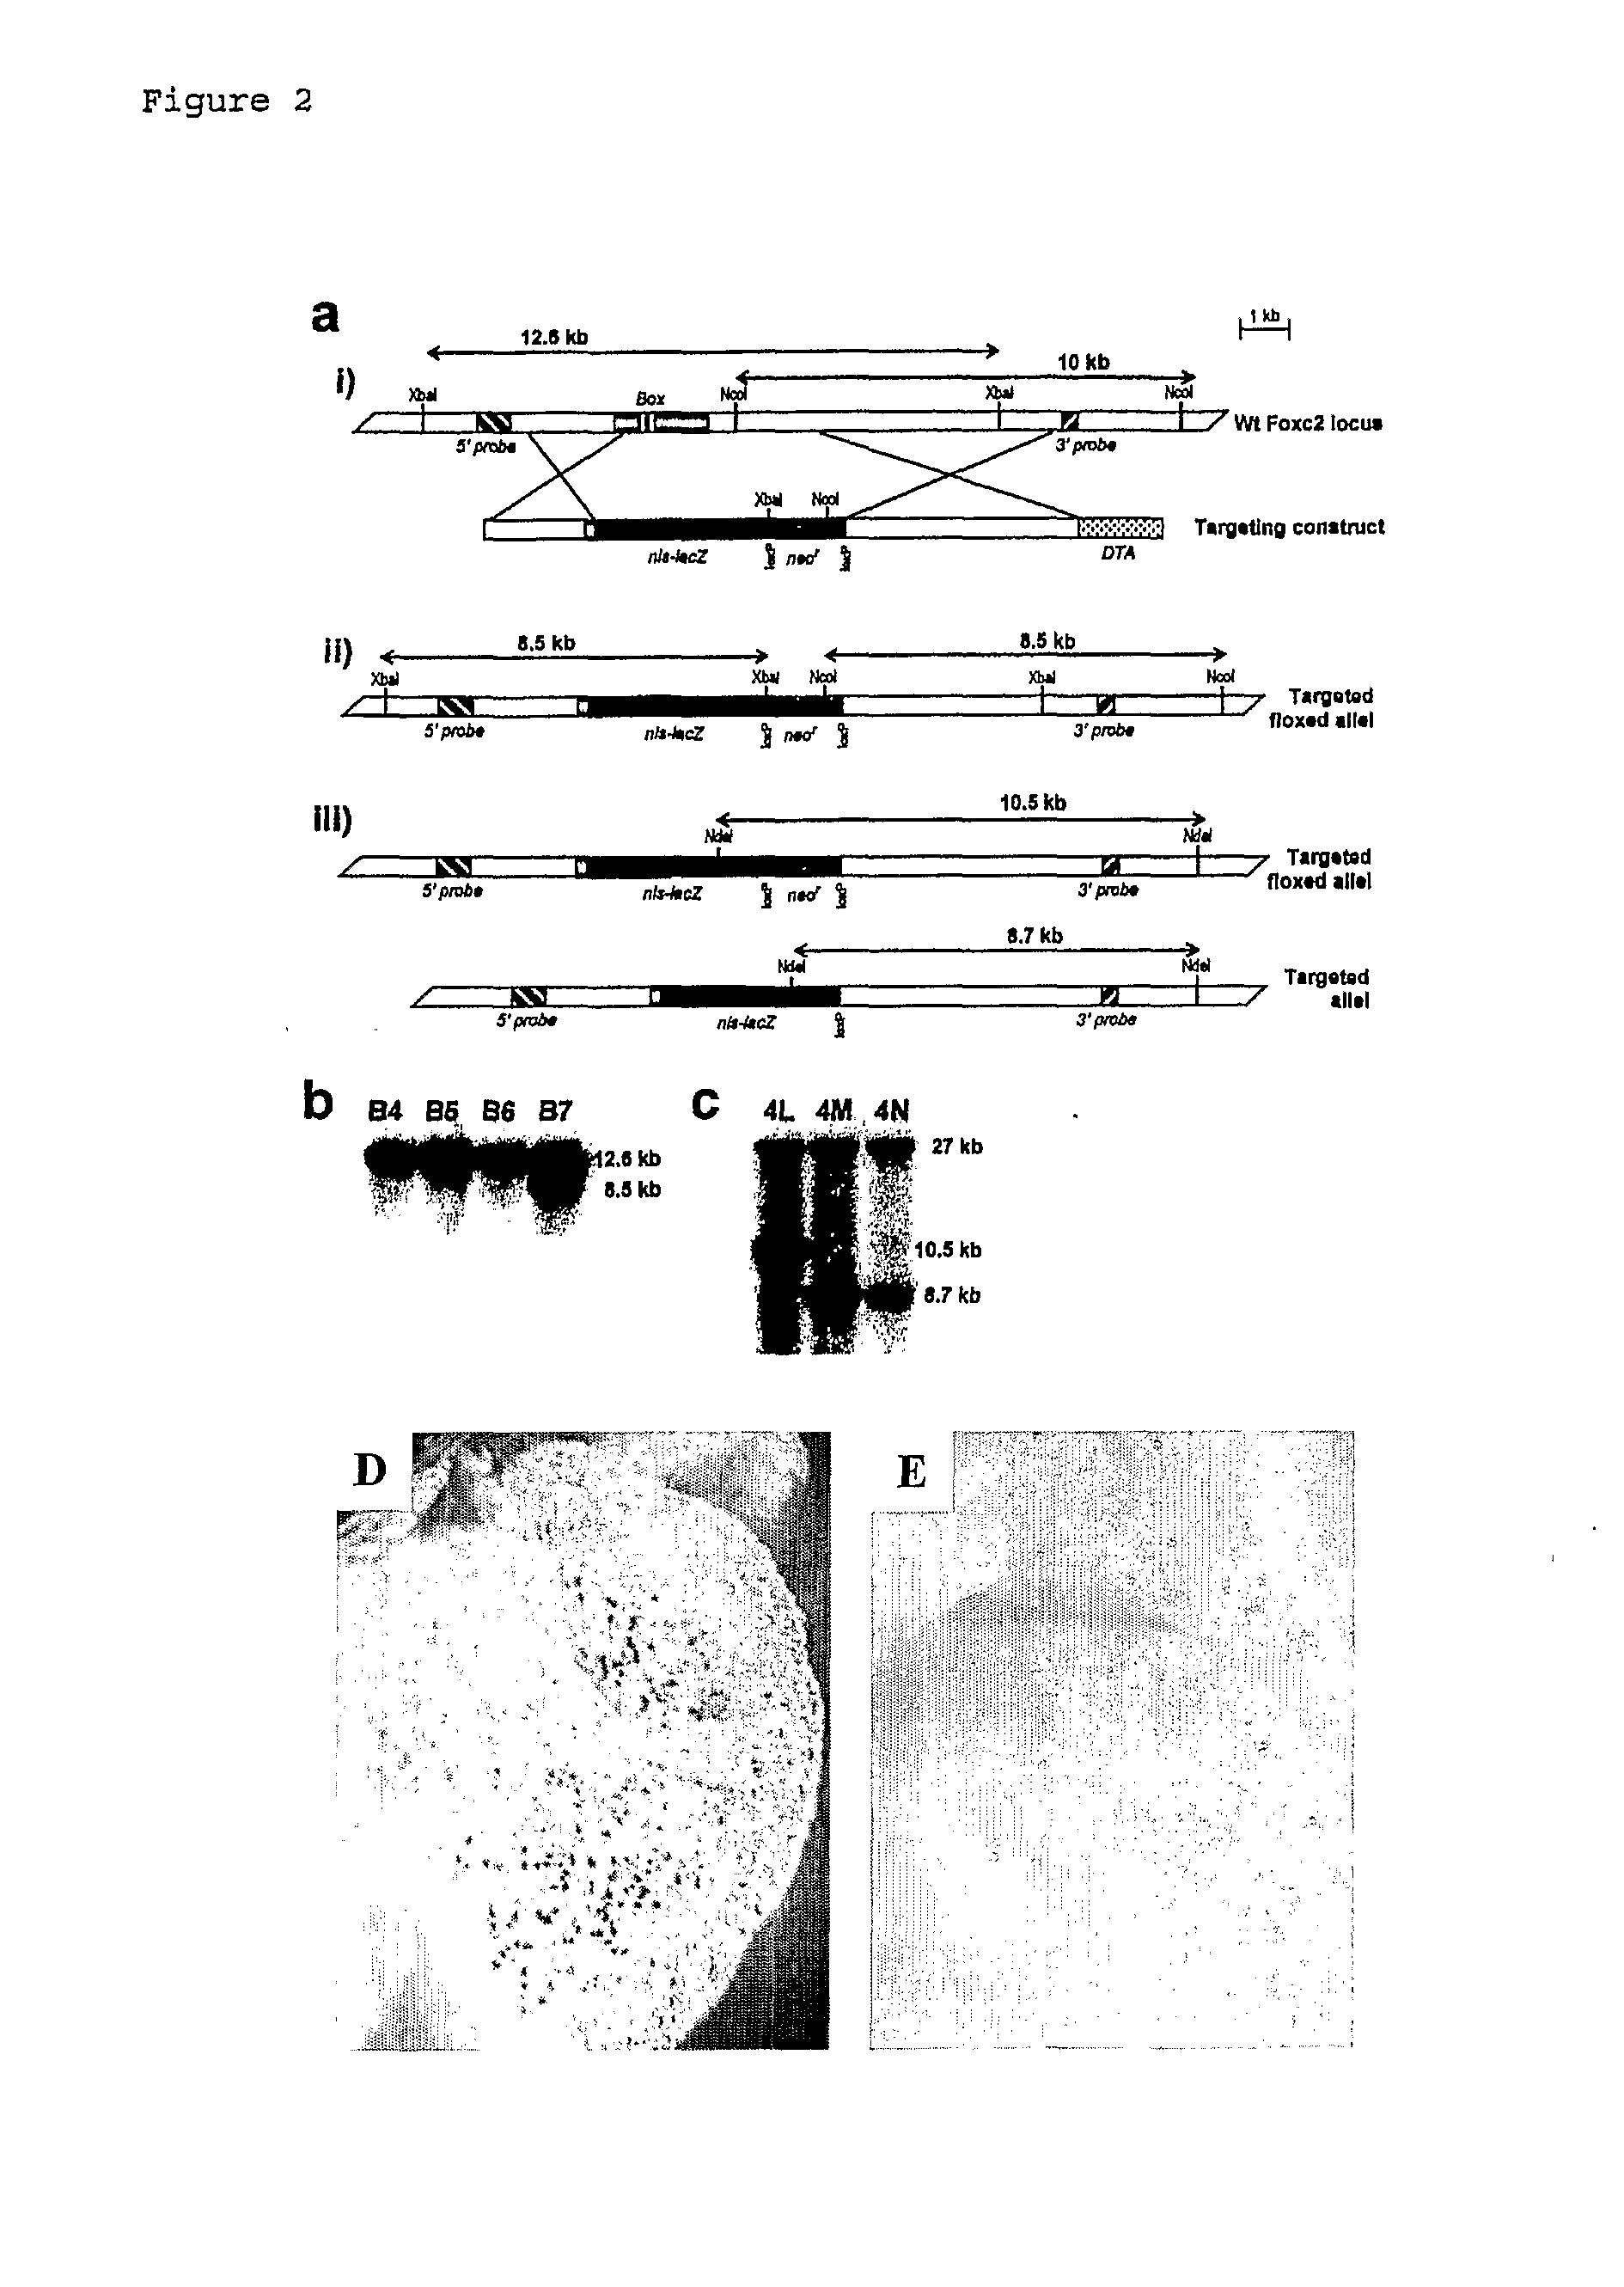 Method For Monitoring the Effect of Compounds on Foxc2 Expression